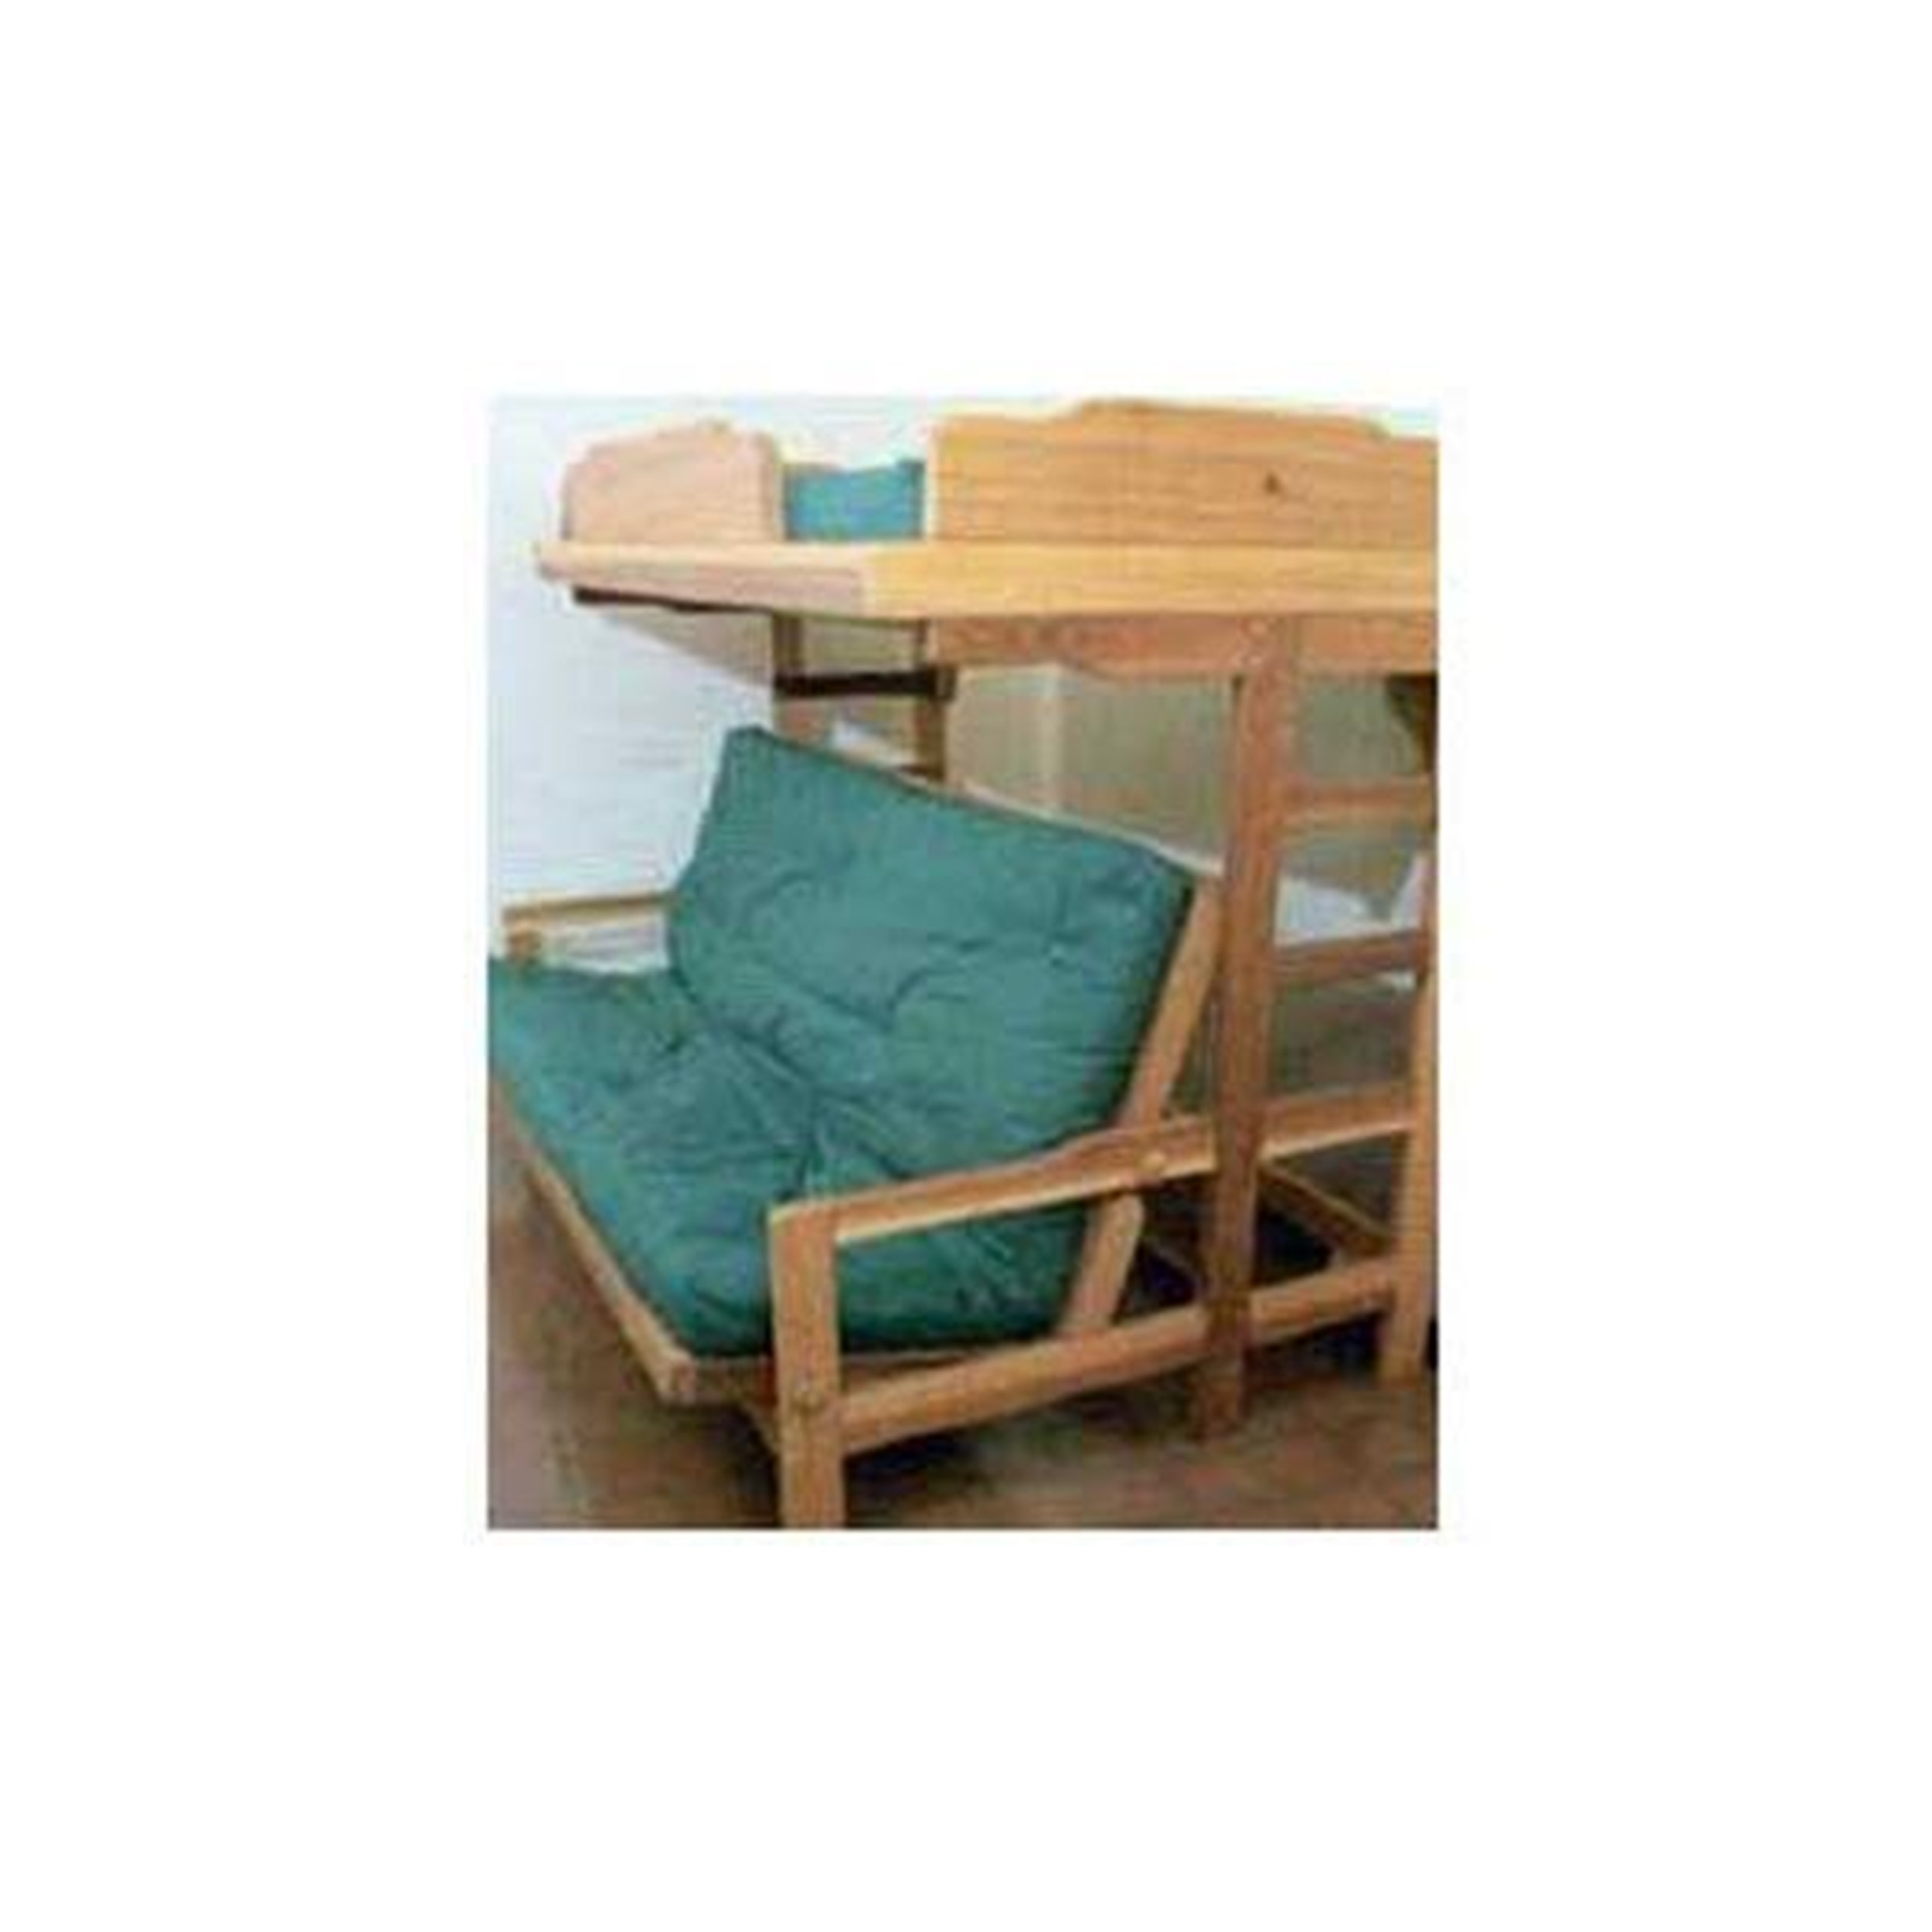 Woodworking Project Paper Plan To Build Futon Bunk Bed